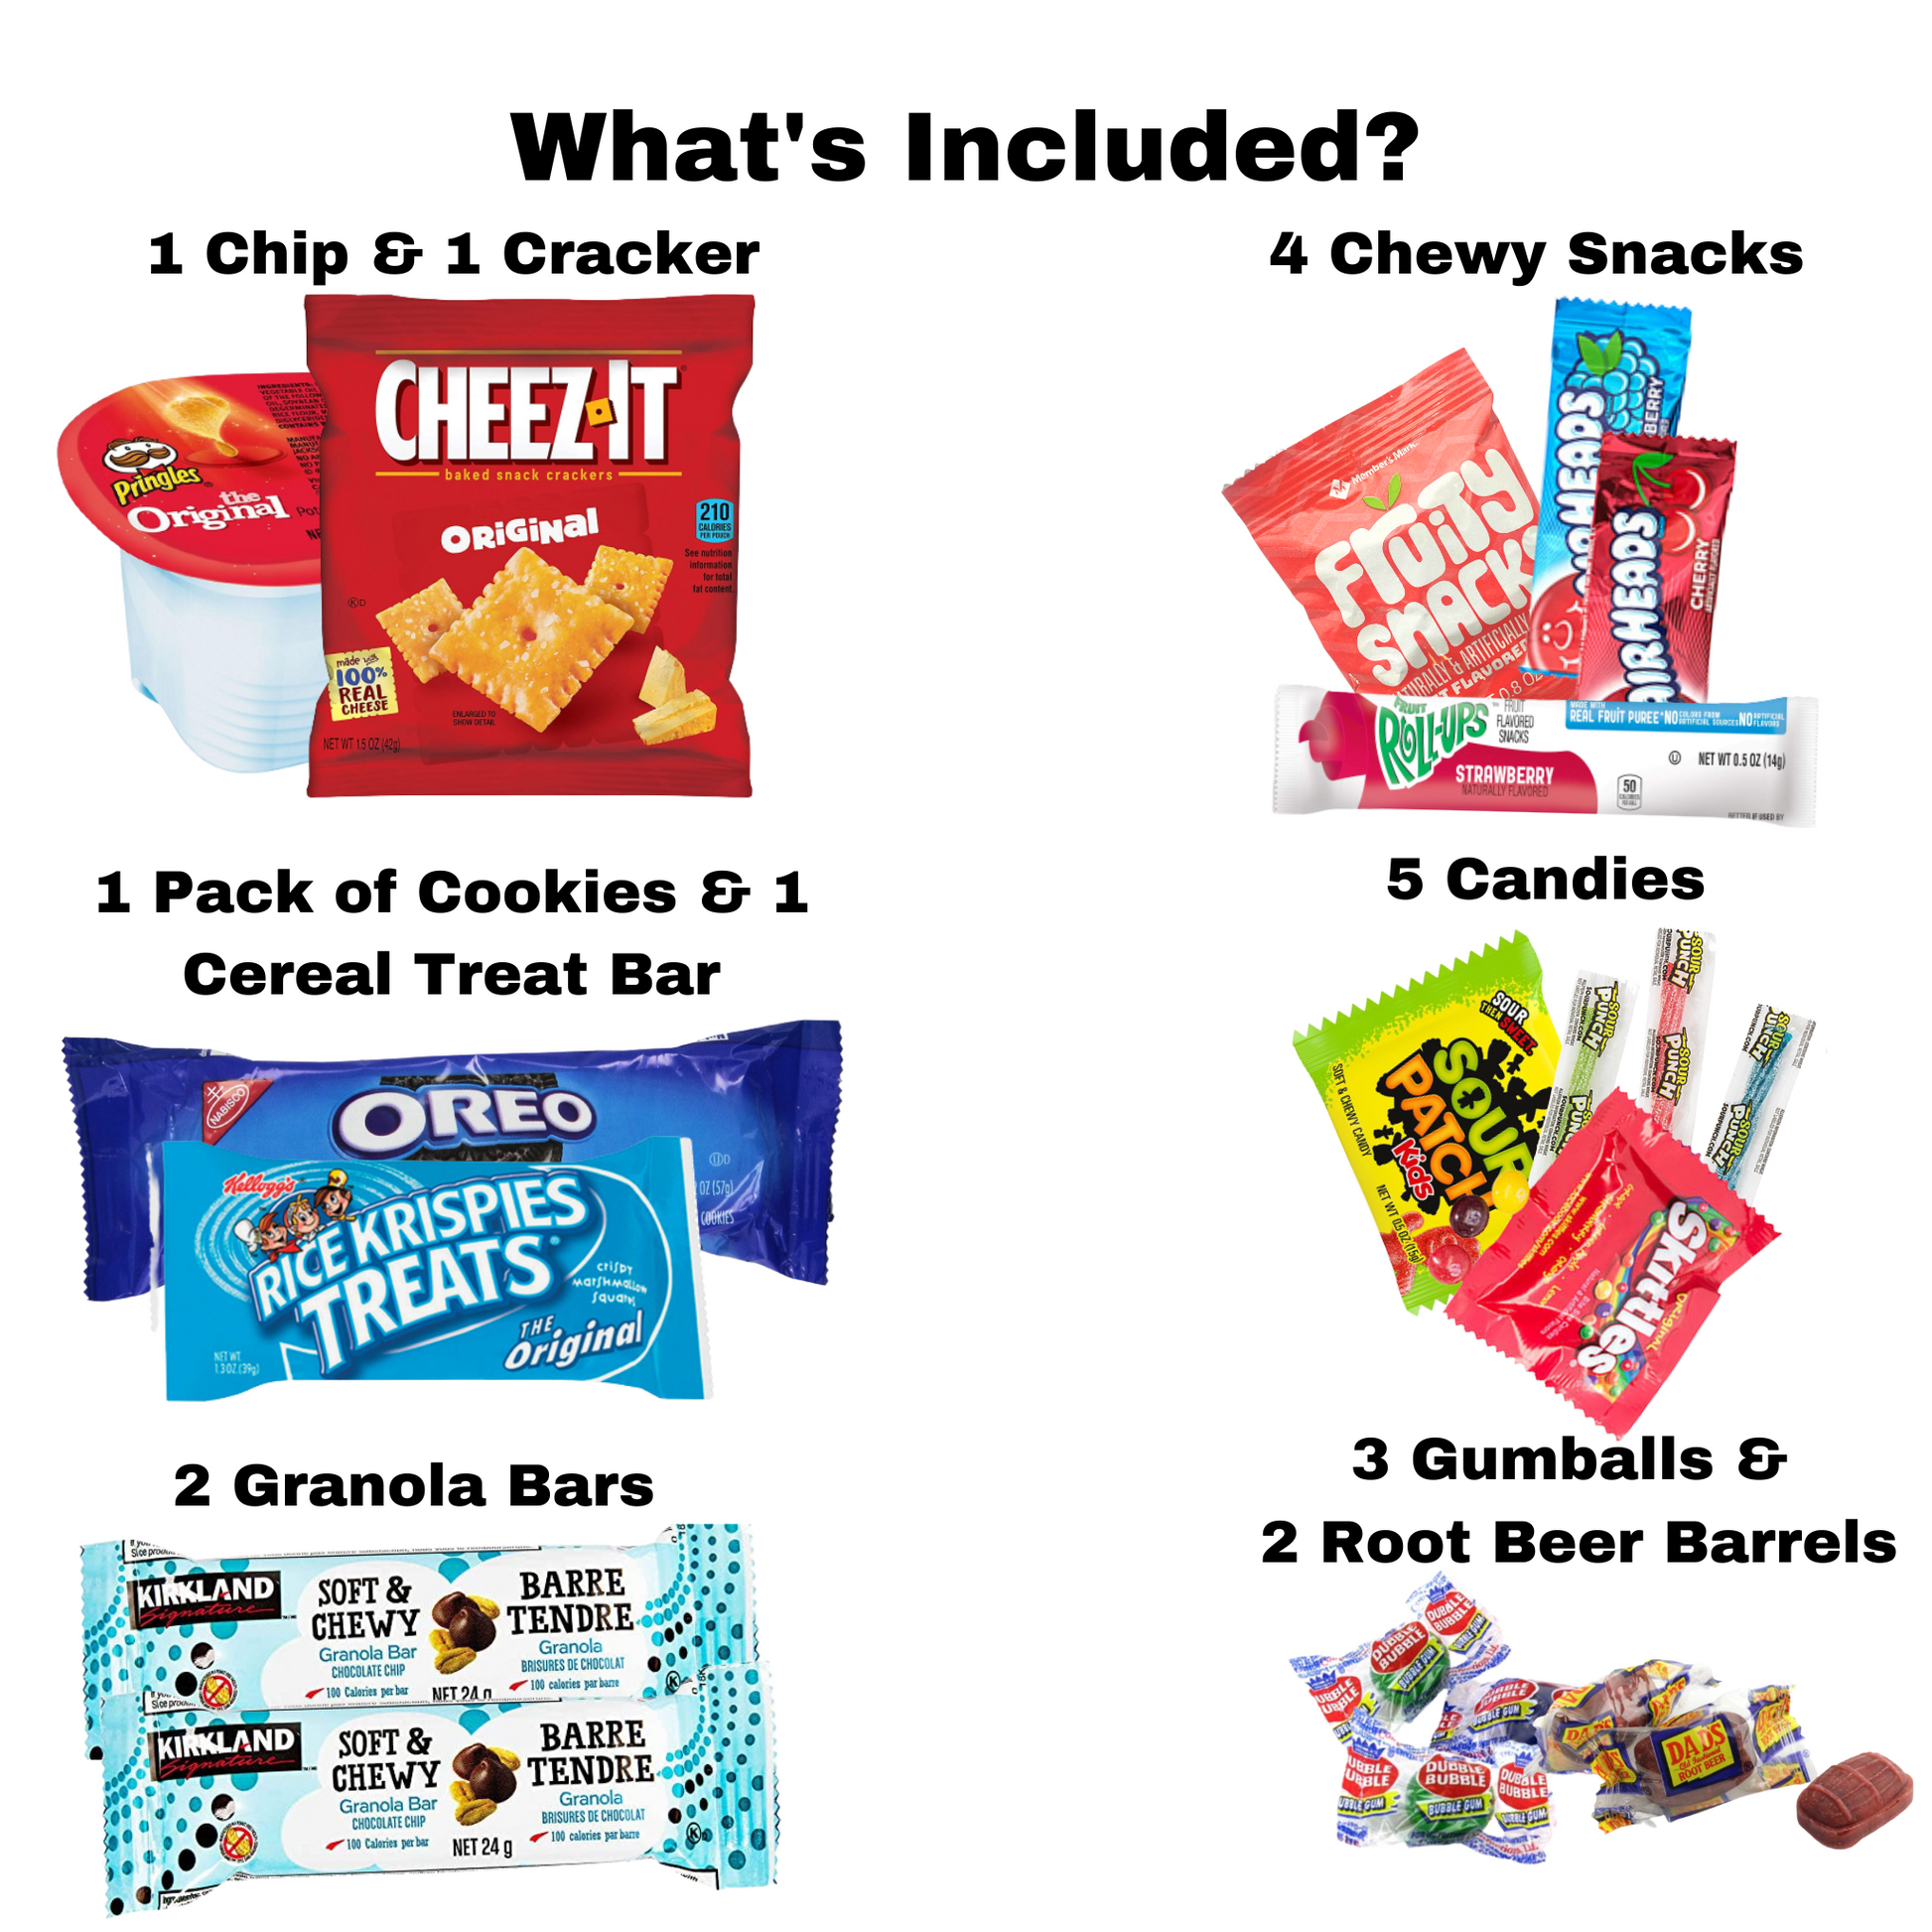 Unlimited Pack - | 20 Count Care Package - snackmtn